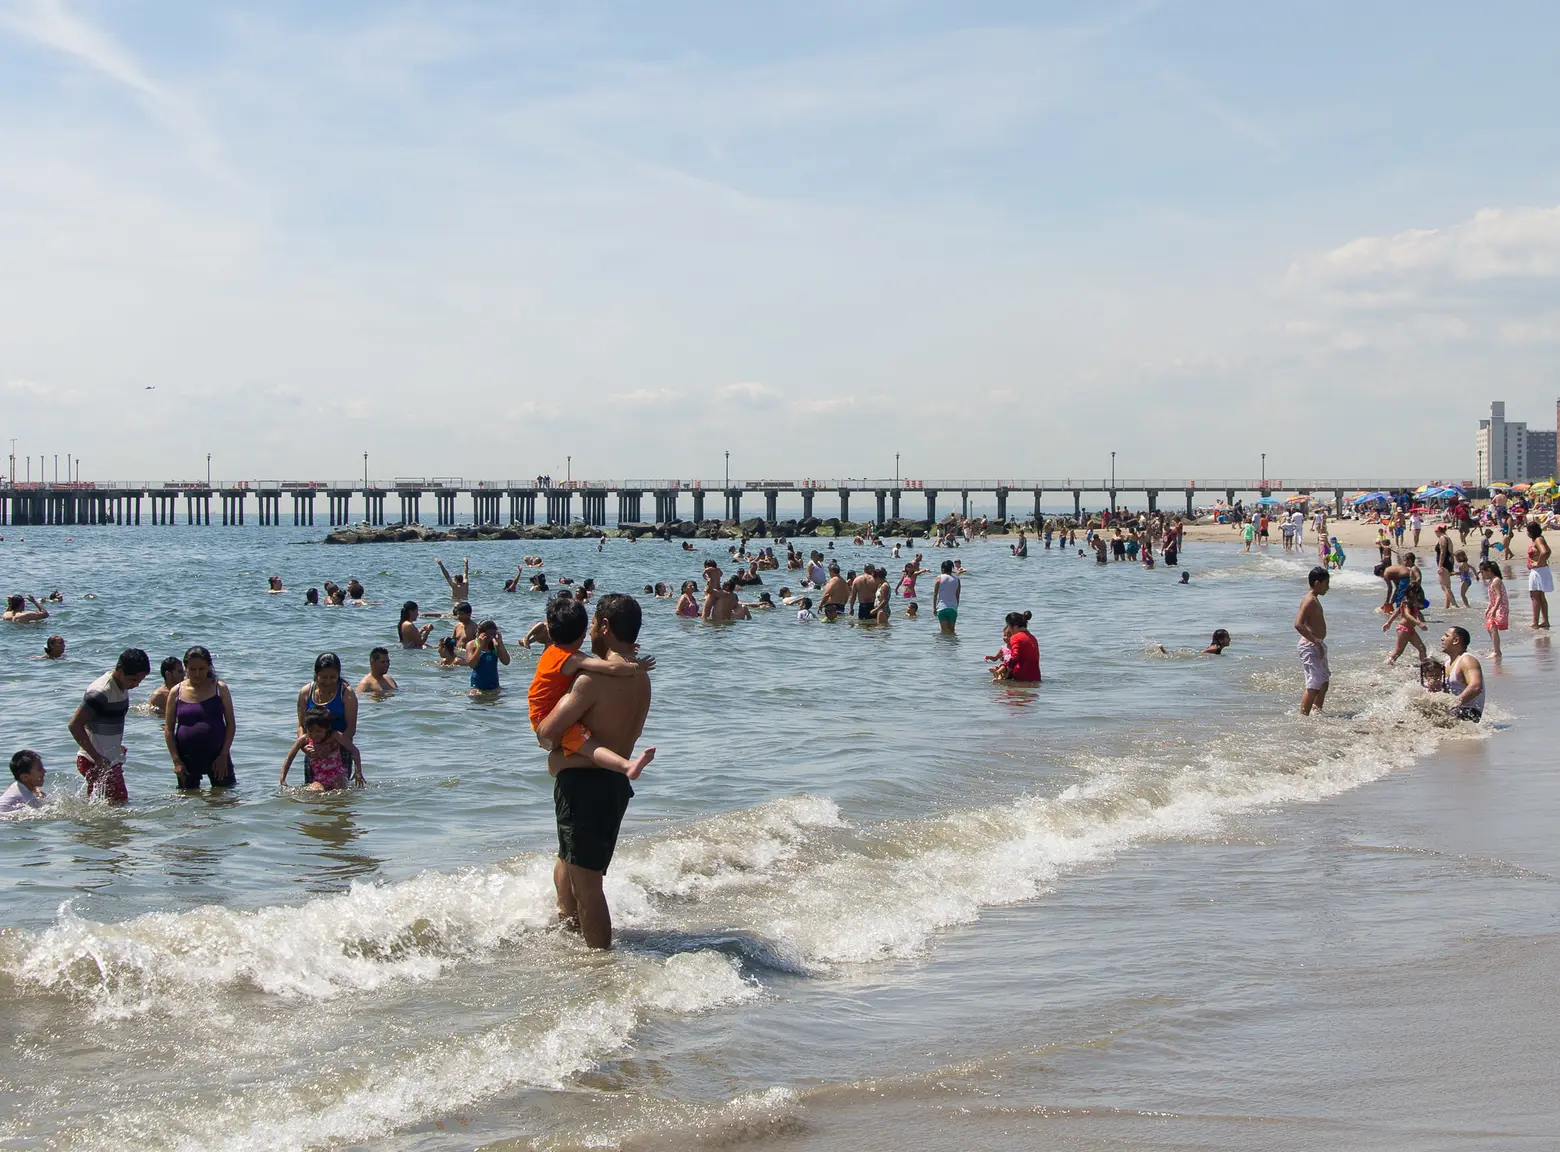 NYC beaches will open for swimming July 1